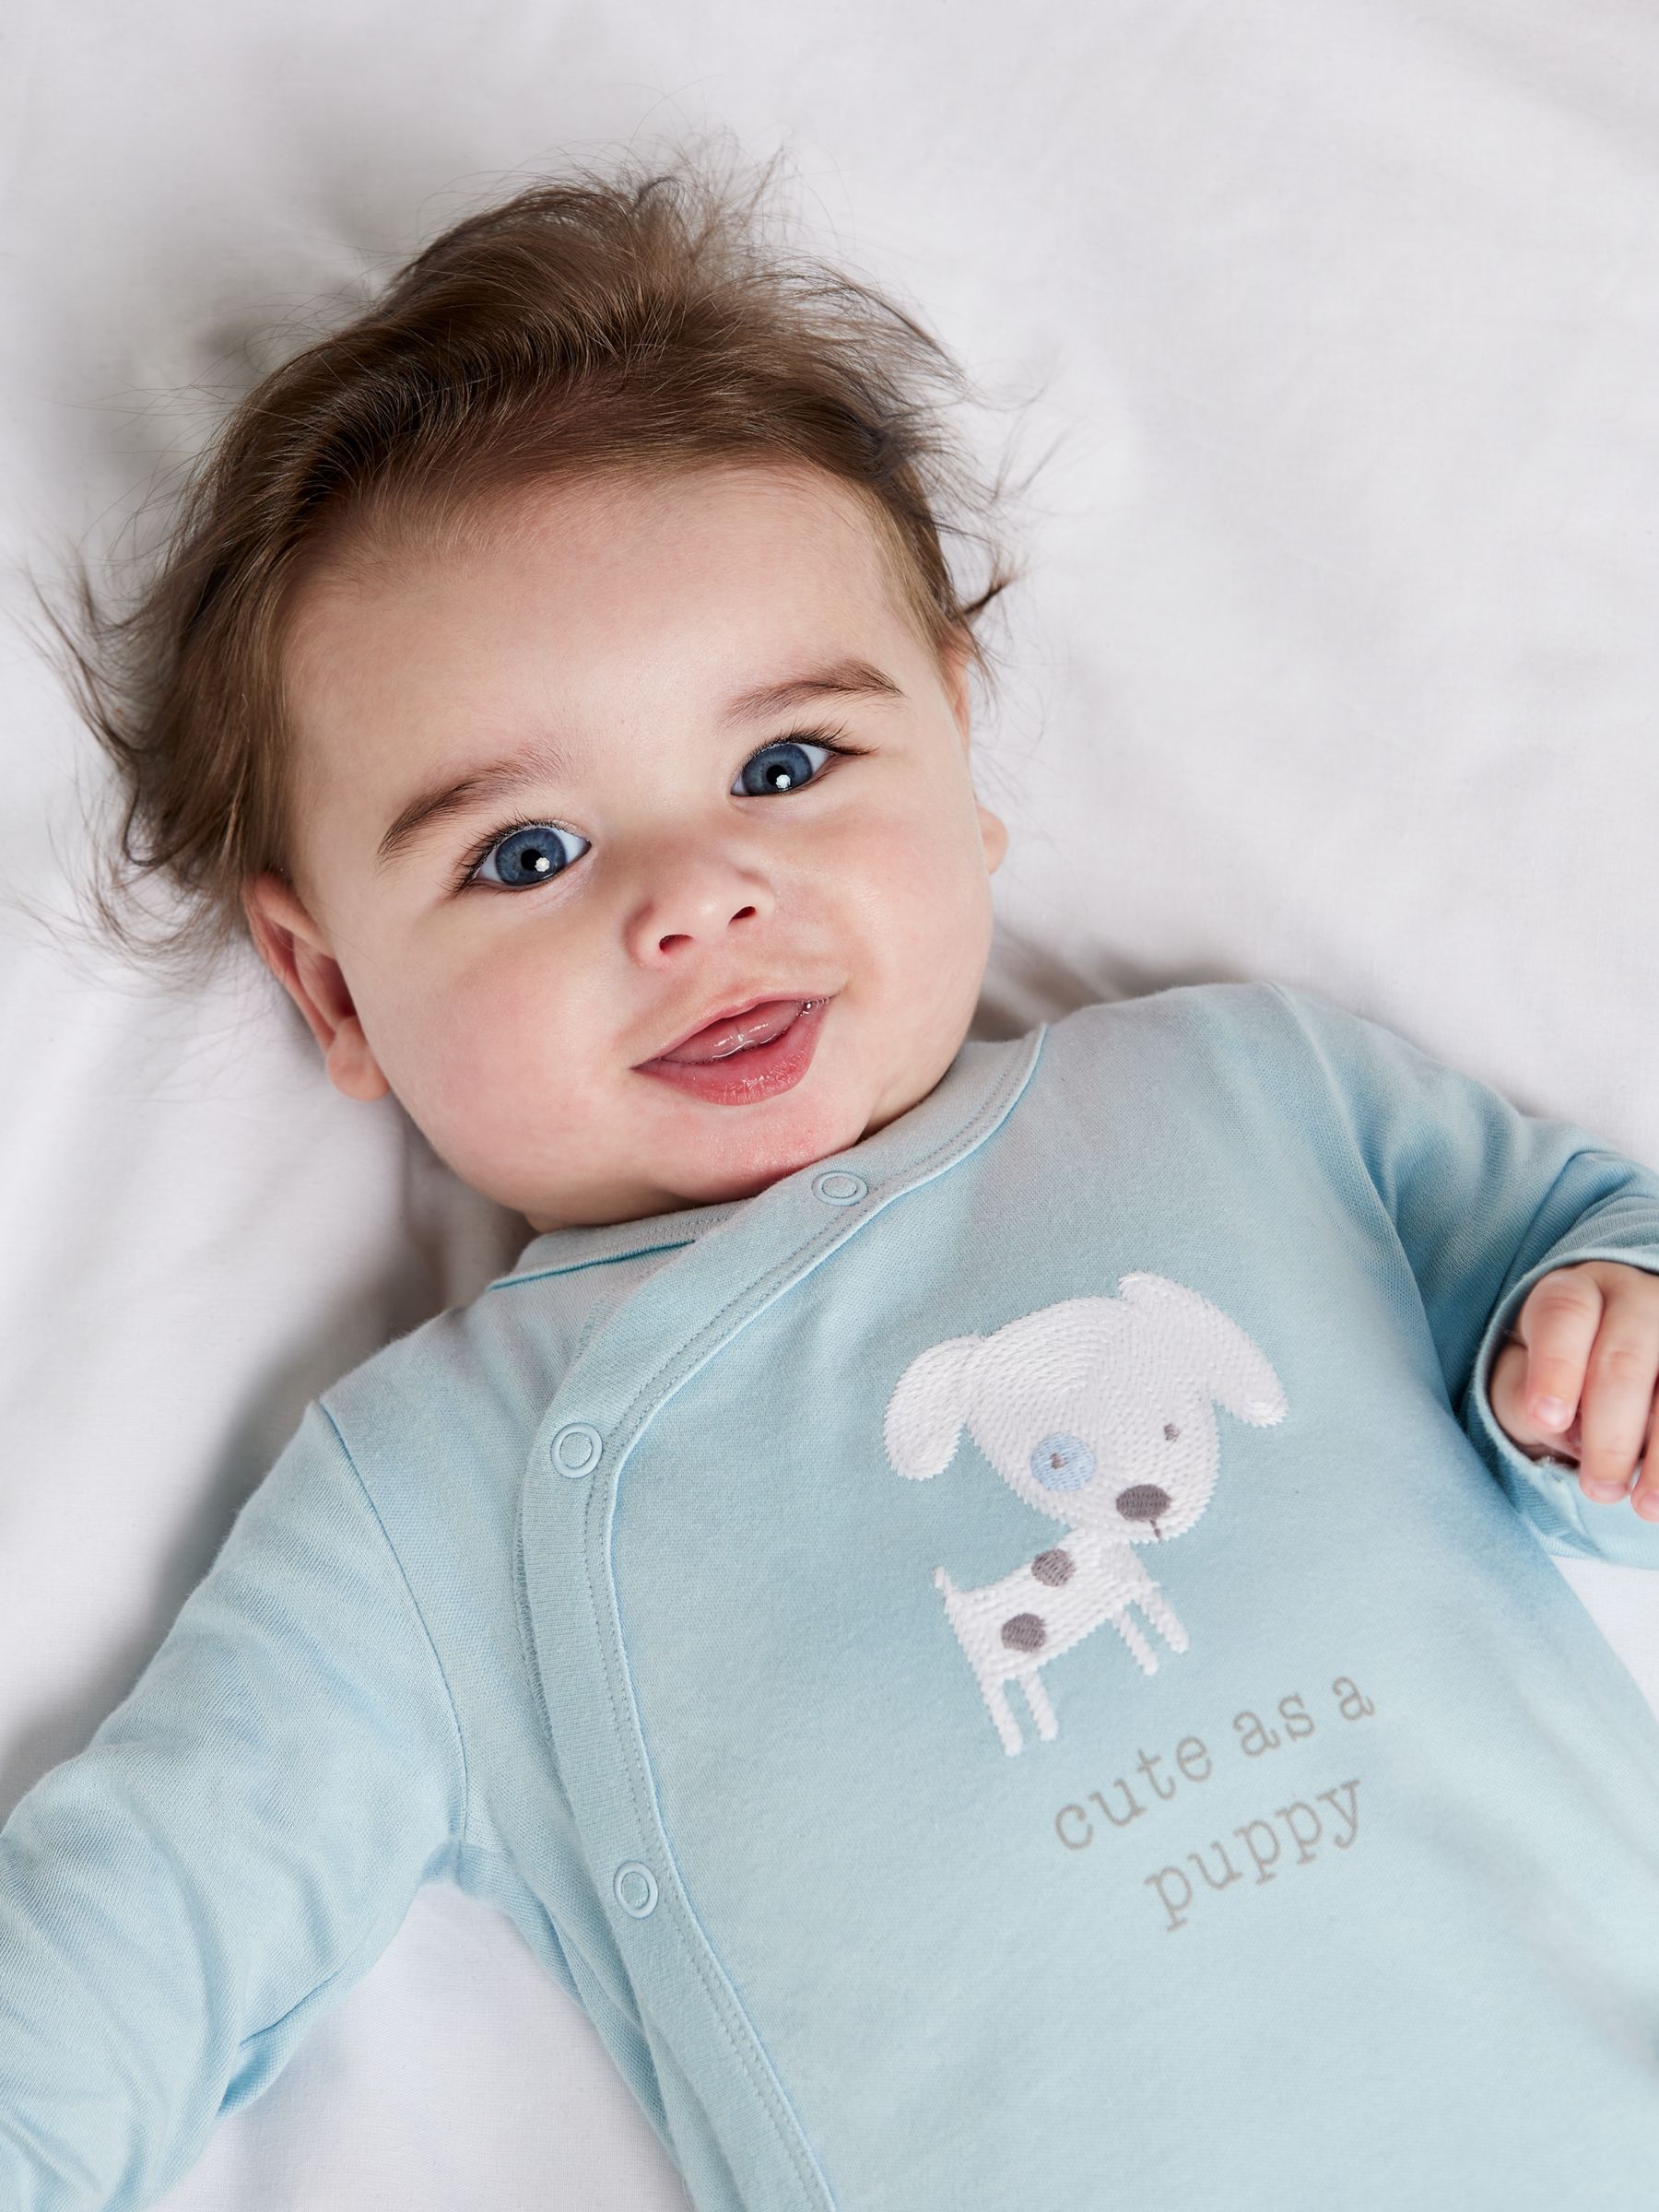 Buy Mini Cuddles Baby Cute as a Puppy Sleepsuit, Blue Puppy Online at johnlewis.com